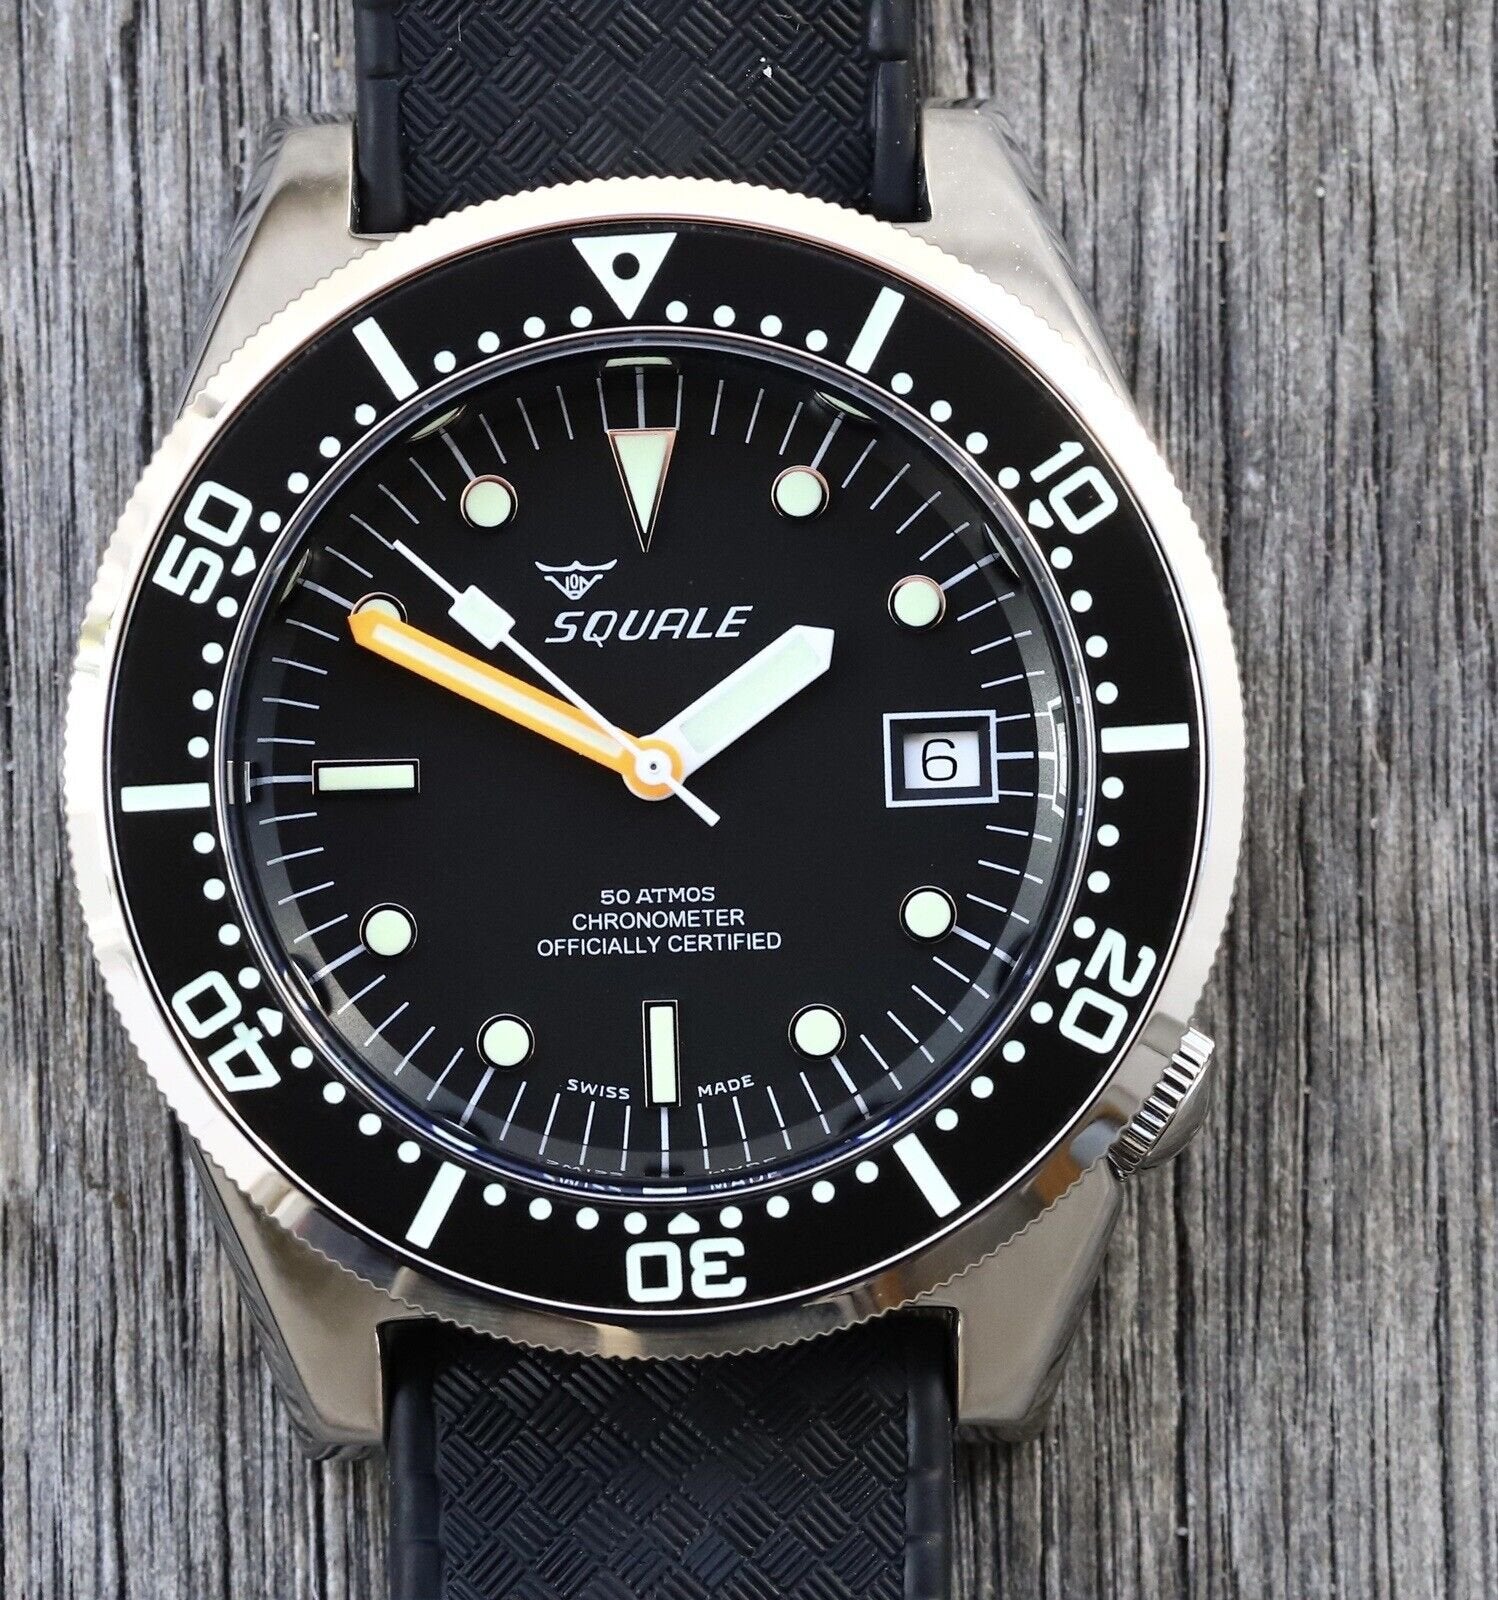 Squale_1521_Classic_COSC_Certified_Chronometer_1521COSC_-_2022_Watch_Vault_01.jpg